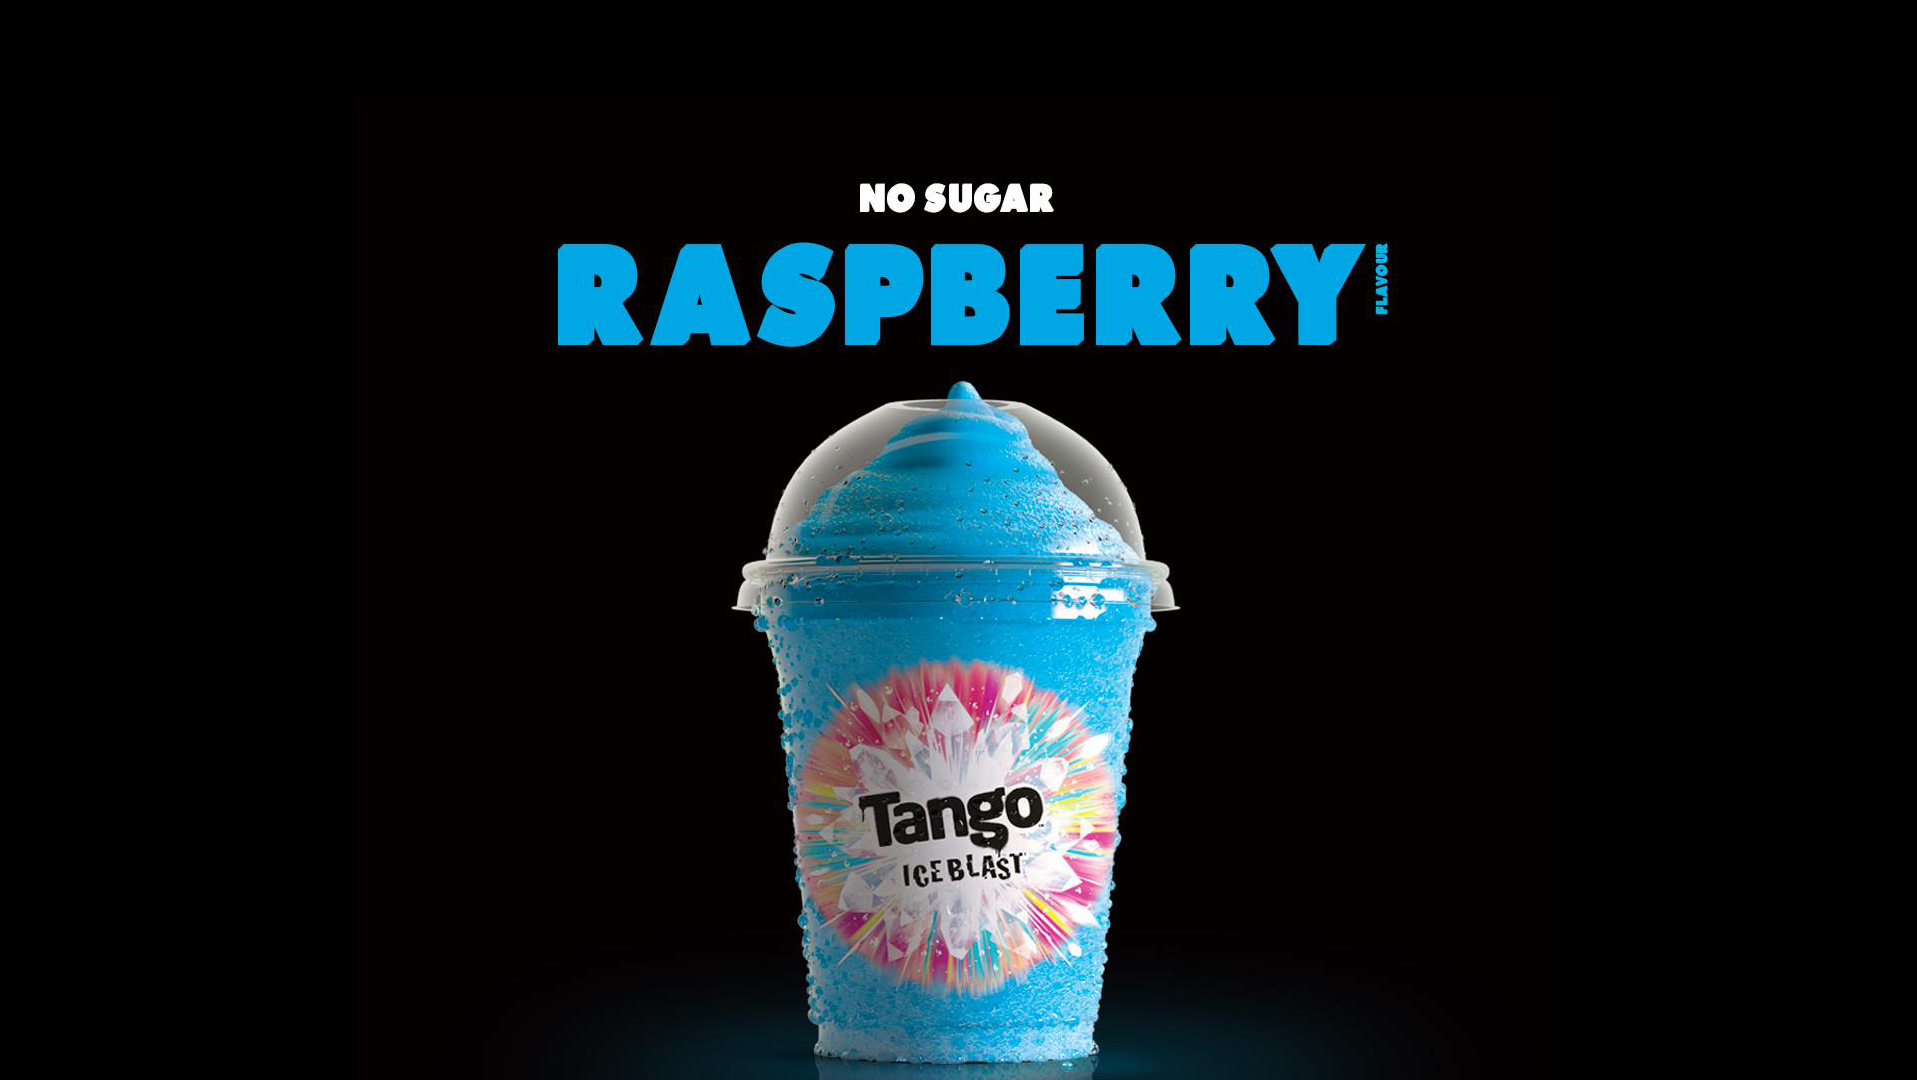 21oz Raspberry Tango Ice Blast - Chicken Delivery in Woodford Wells IG8